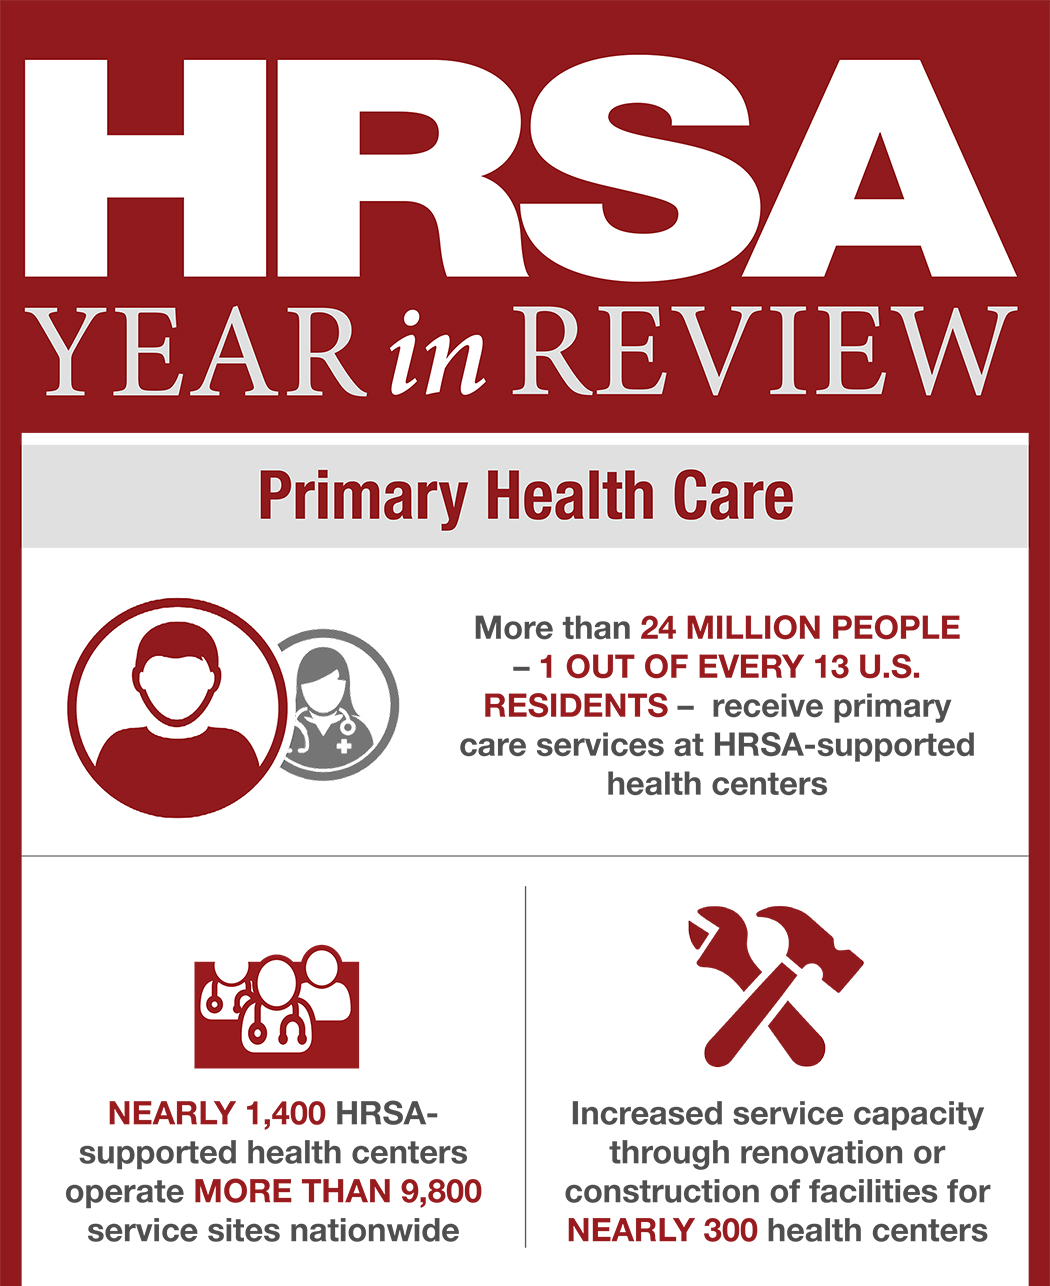 HRSA 2016 Year in Review